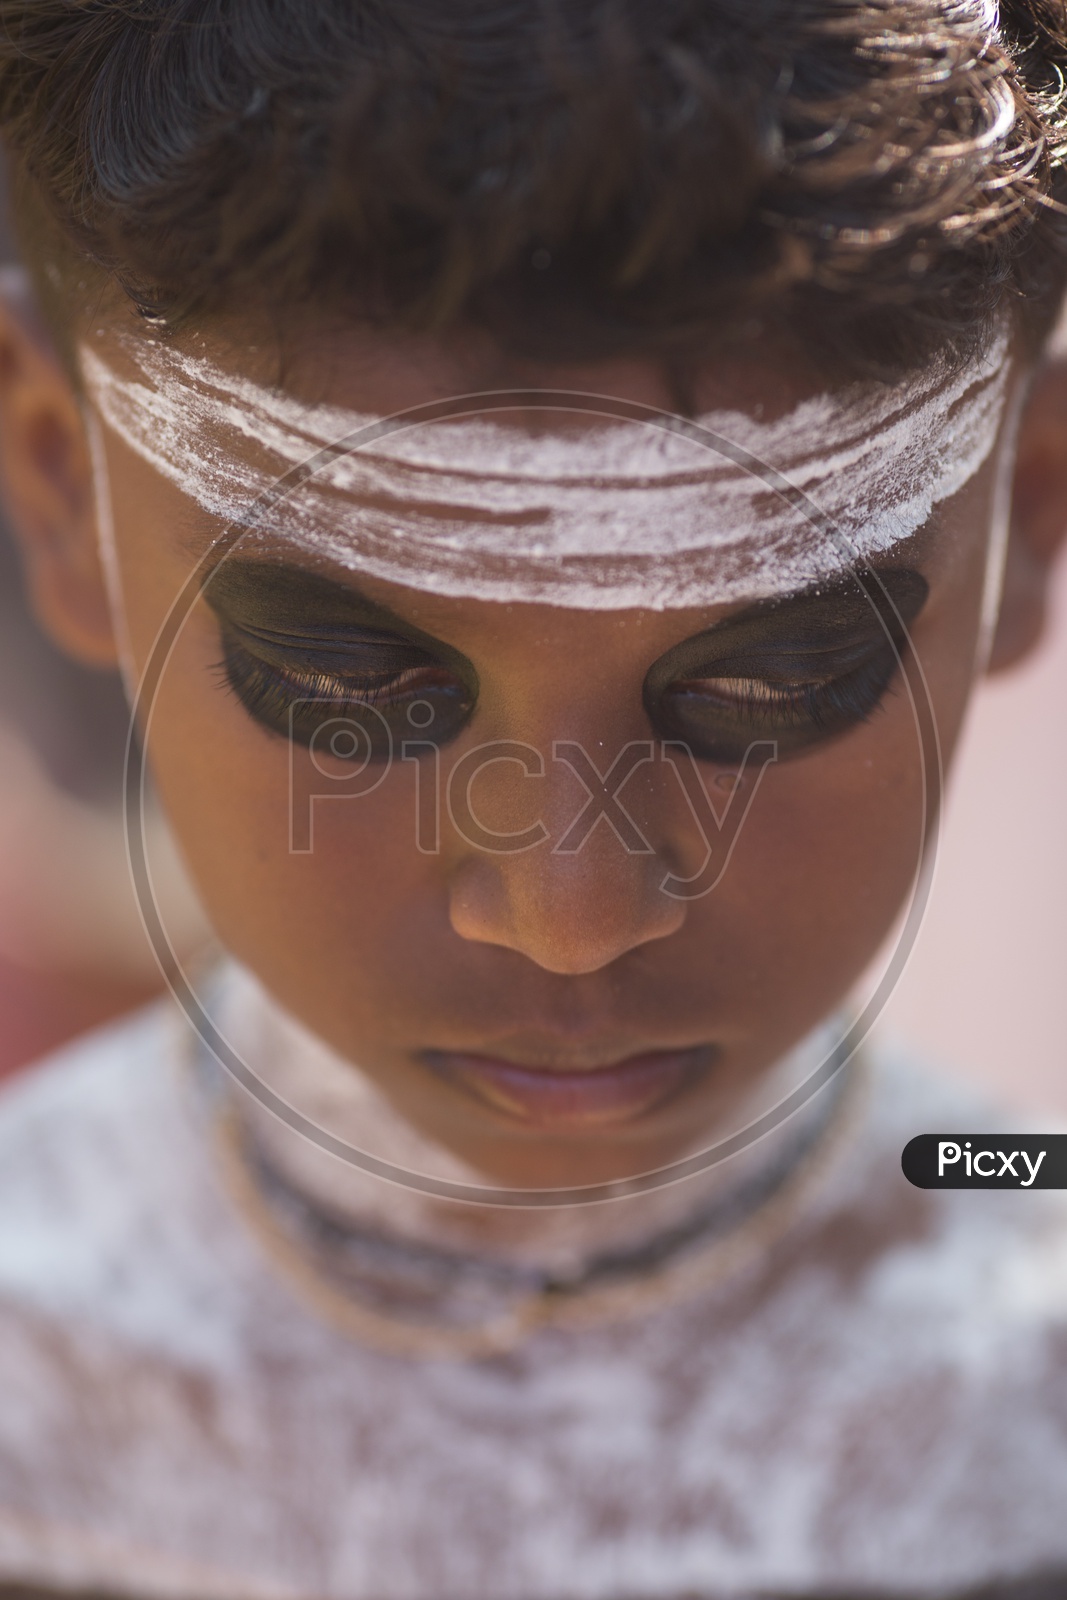 Portrait Of a Young Boy In Theyyam Artist Makeup For Performance